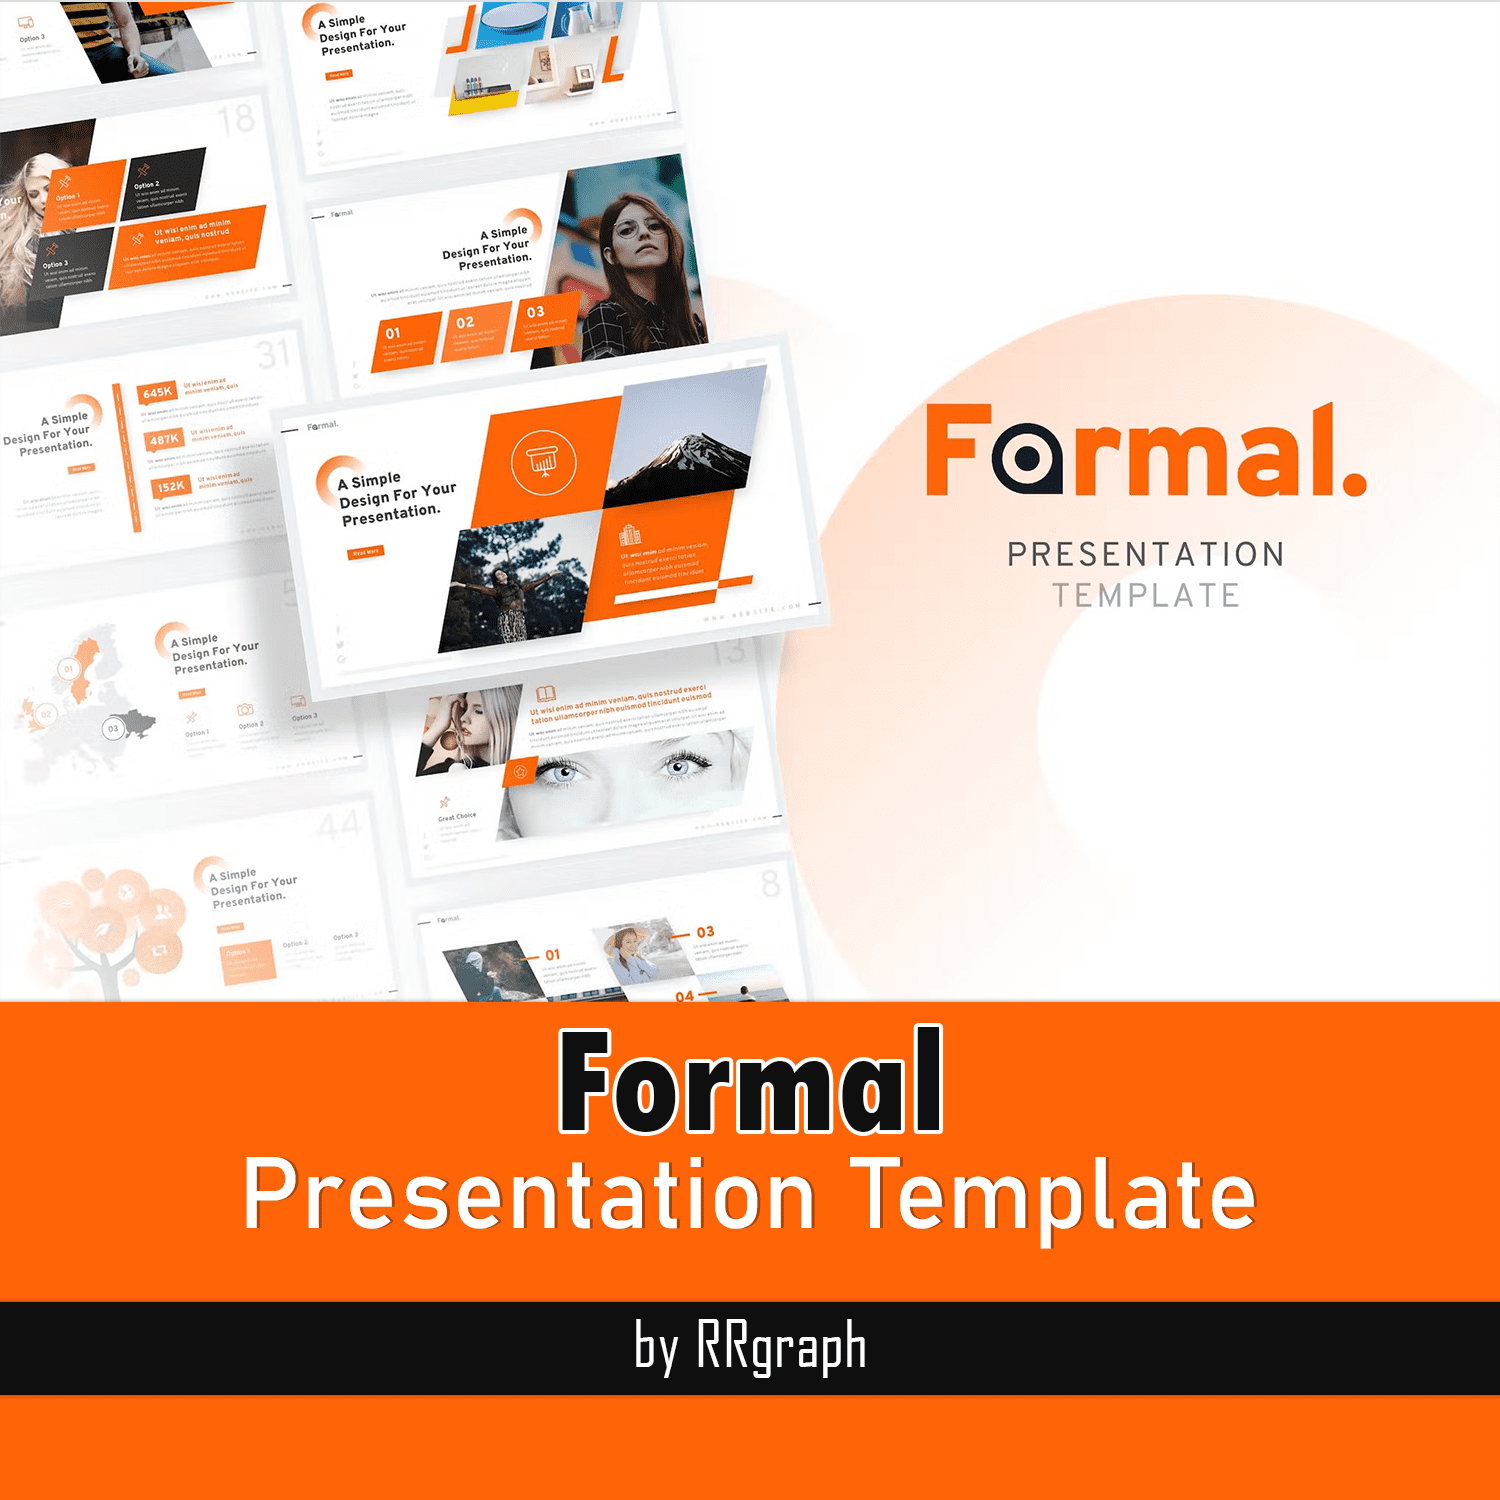 Template For Formal Presentations.